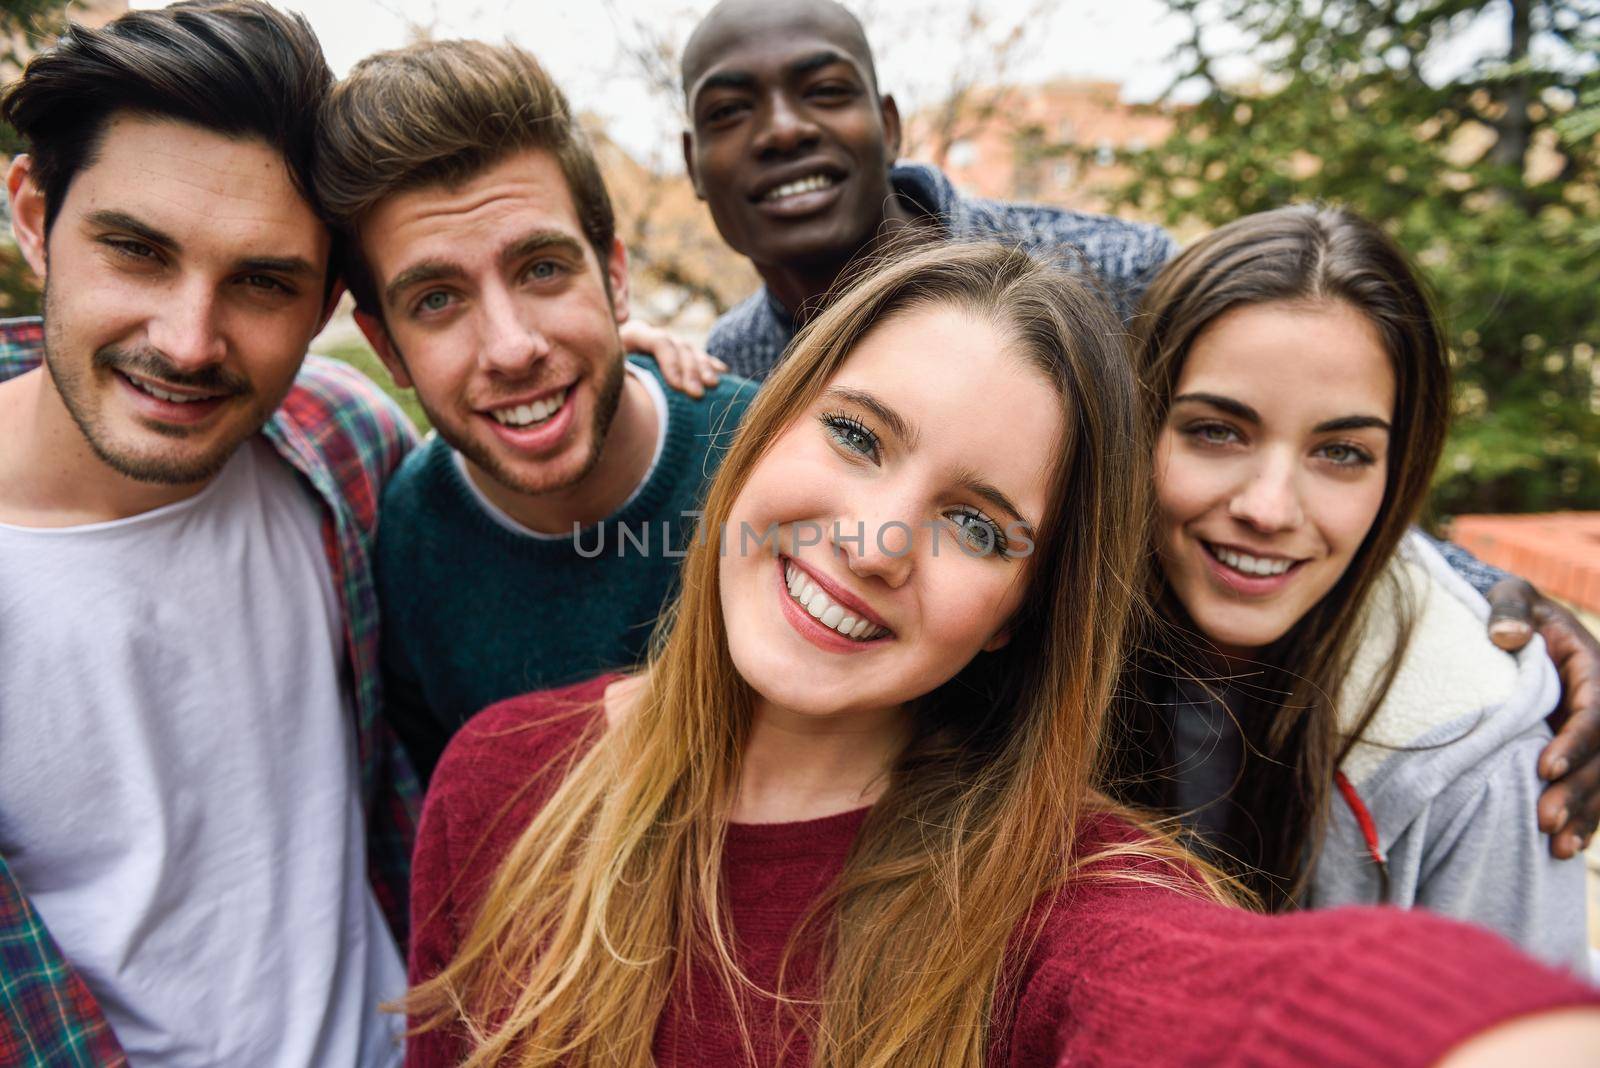 Multiracial group of friends taking selfie in a urban park with a blonde young girl in foreground